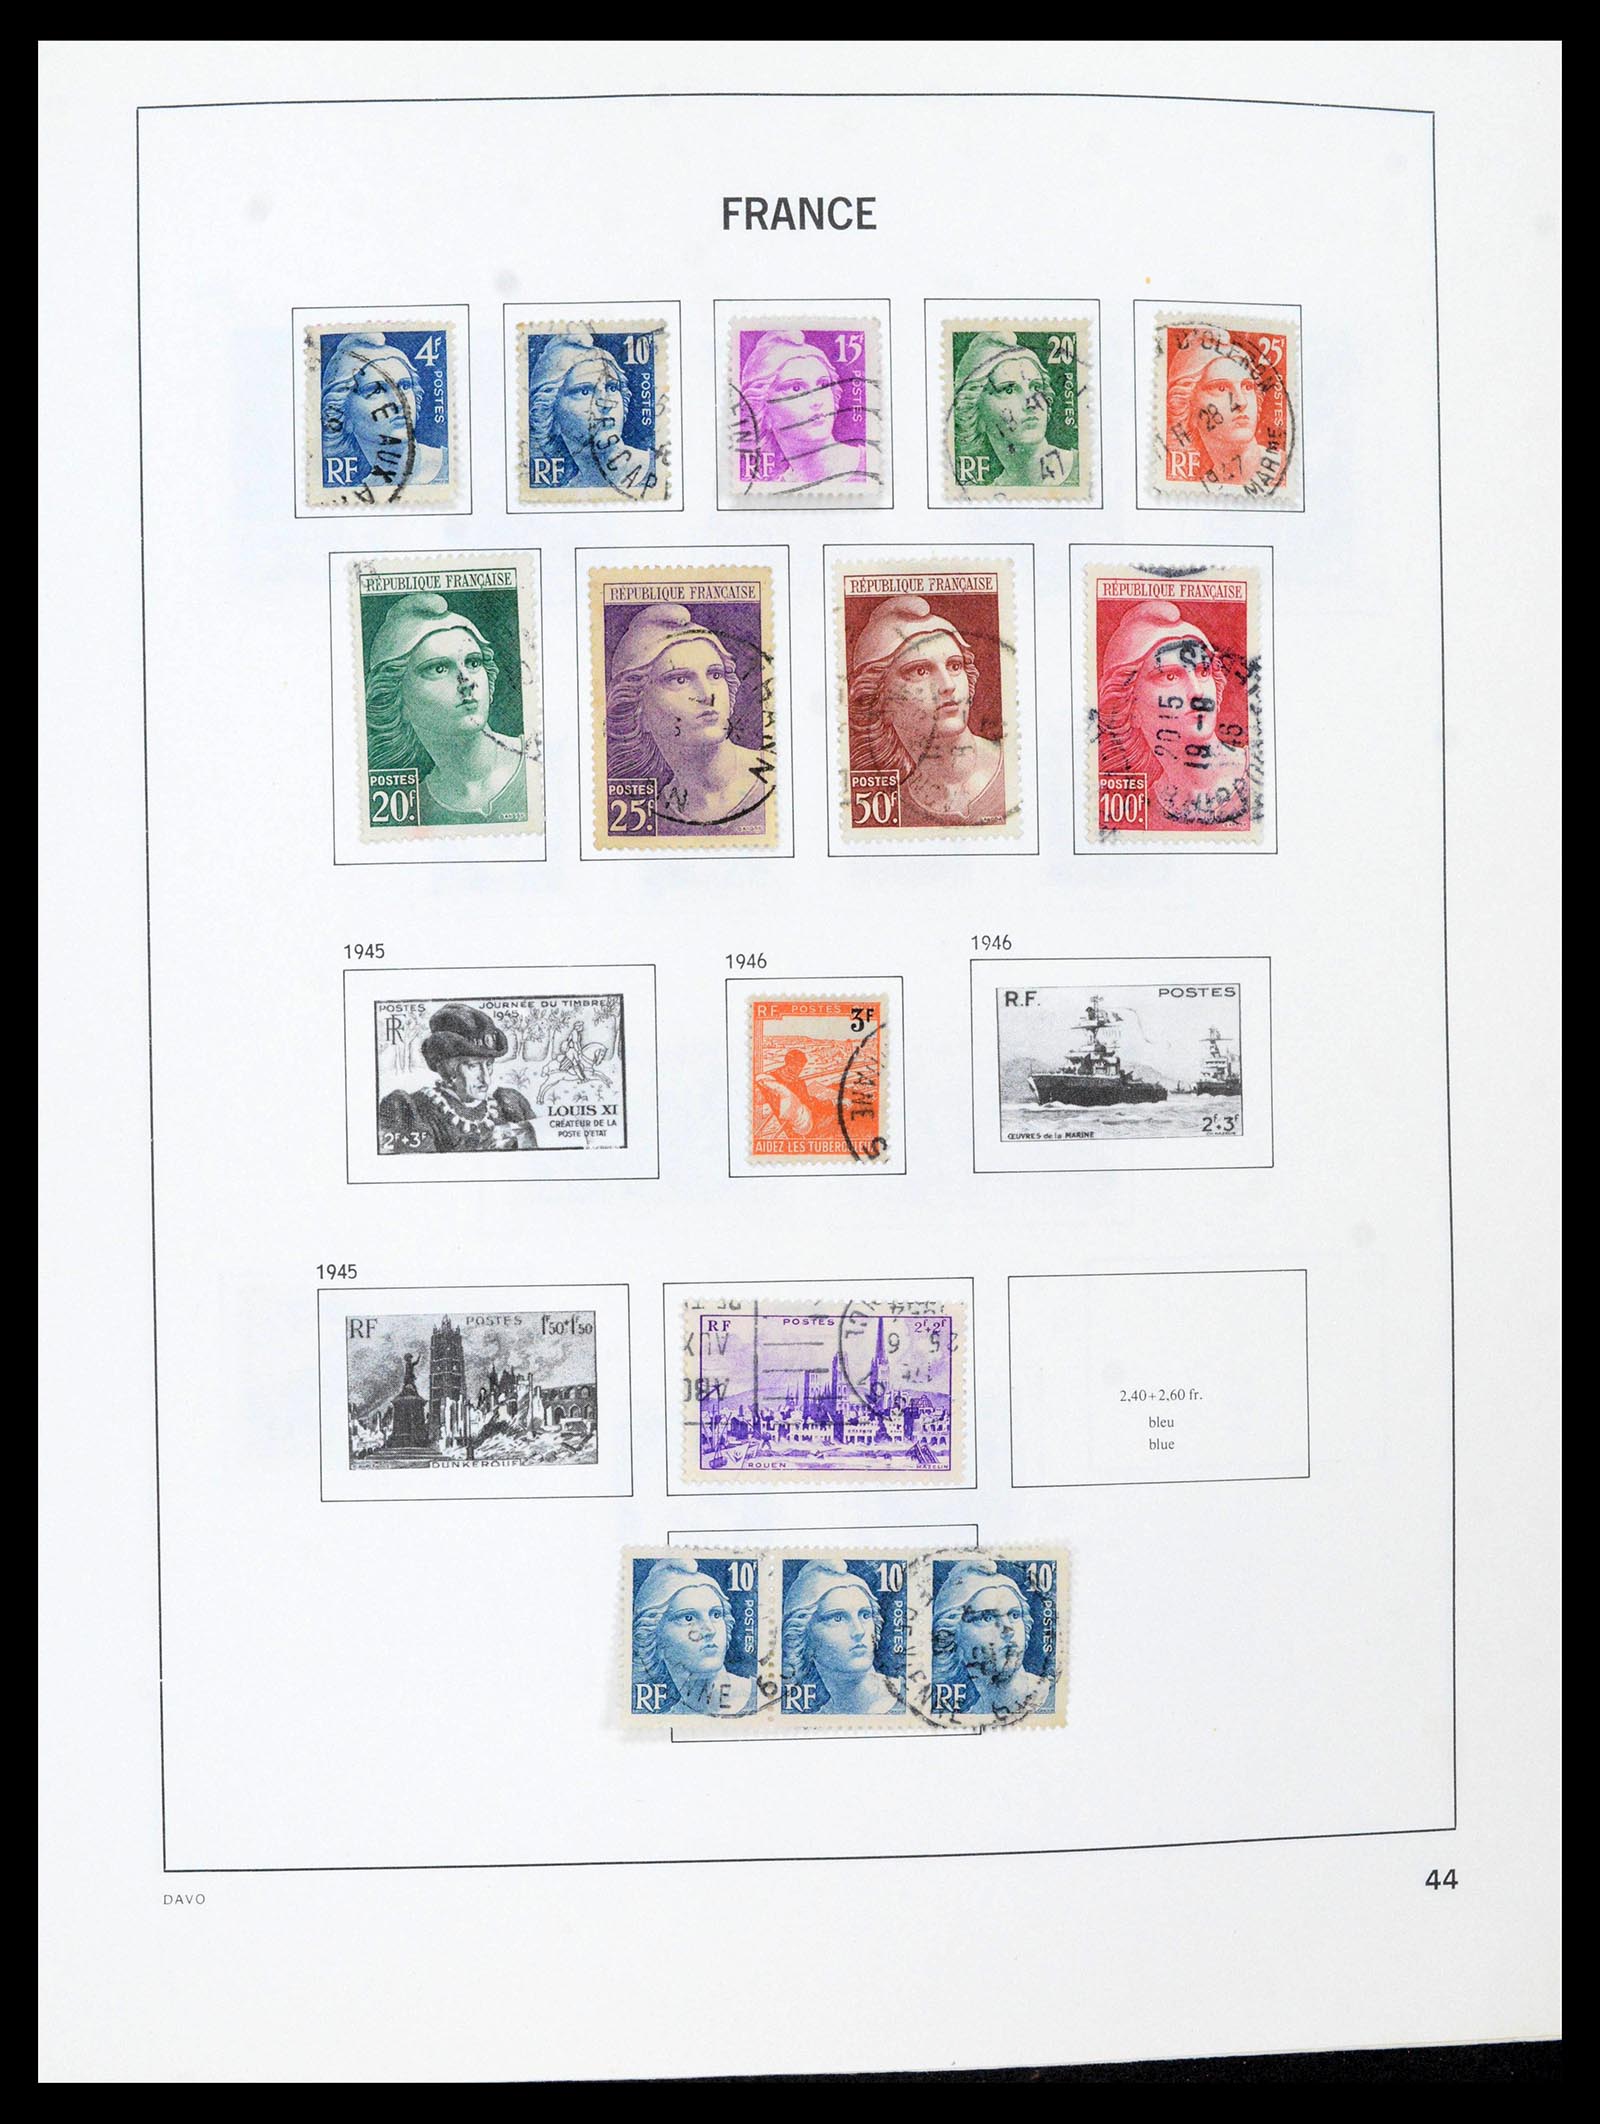 39164 0044 - Stamp collection 39164 France 1849-1981.